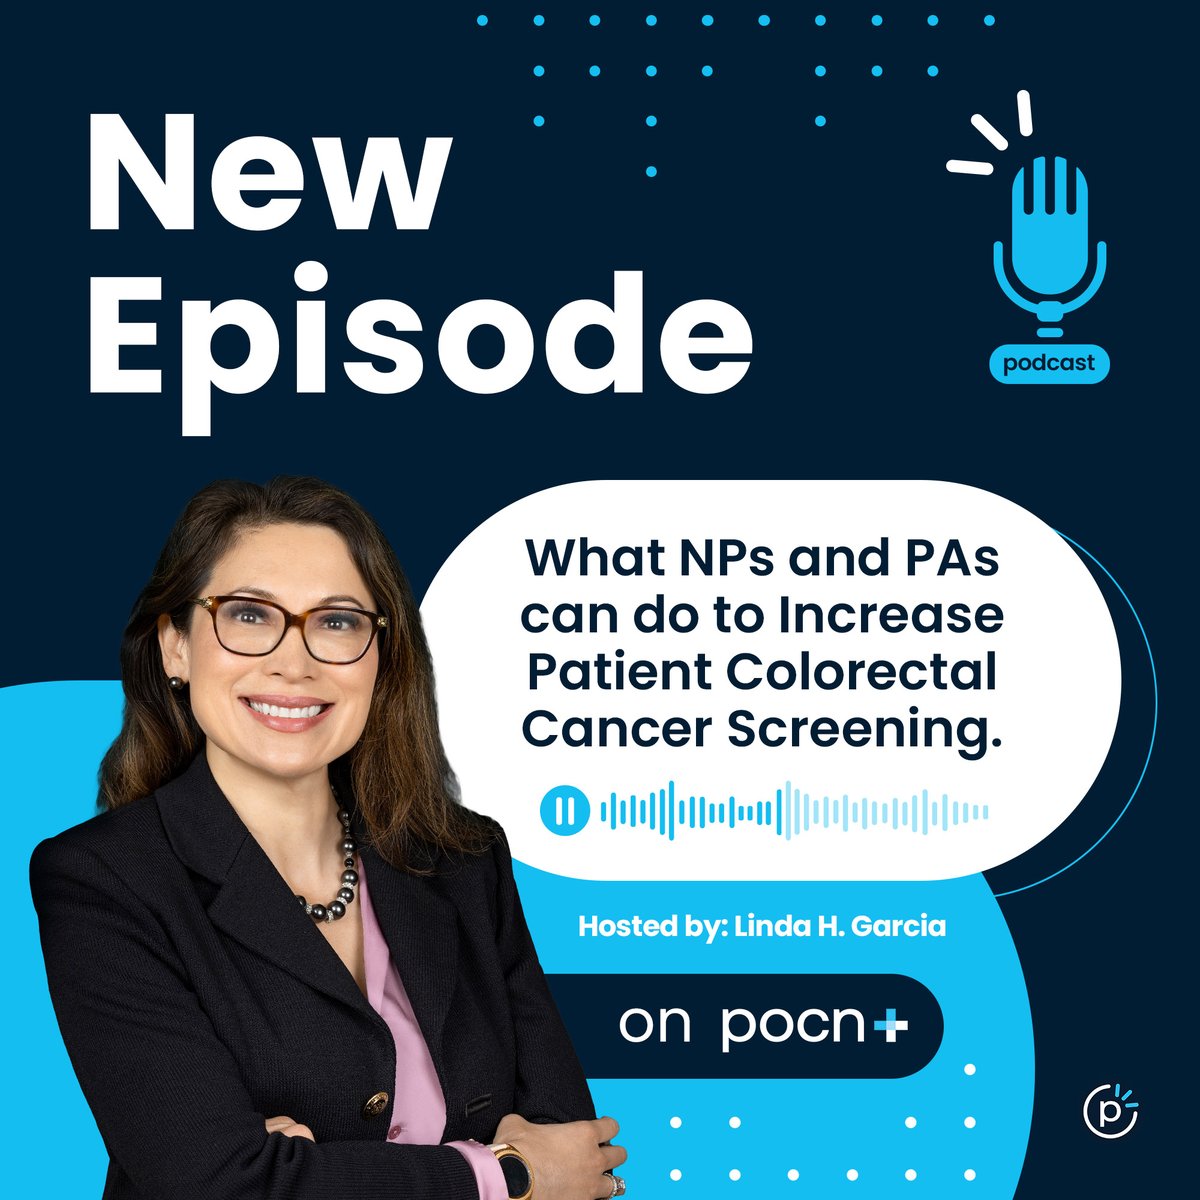 Colorectal cancer causes tragic losses, especially among those under 50, but screening remains underutilized. Our podcast discusses how NPs & PAs can change this, featuring experts Barbara G. Regis & Elisabeth Evans. Listen now: pocnplus.com/audio/what-nps… #ColorectalCancerAwareness